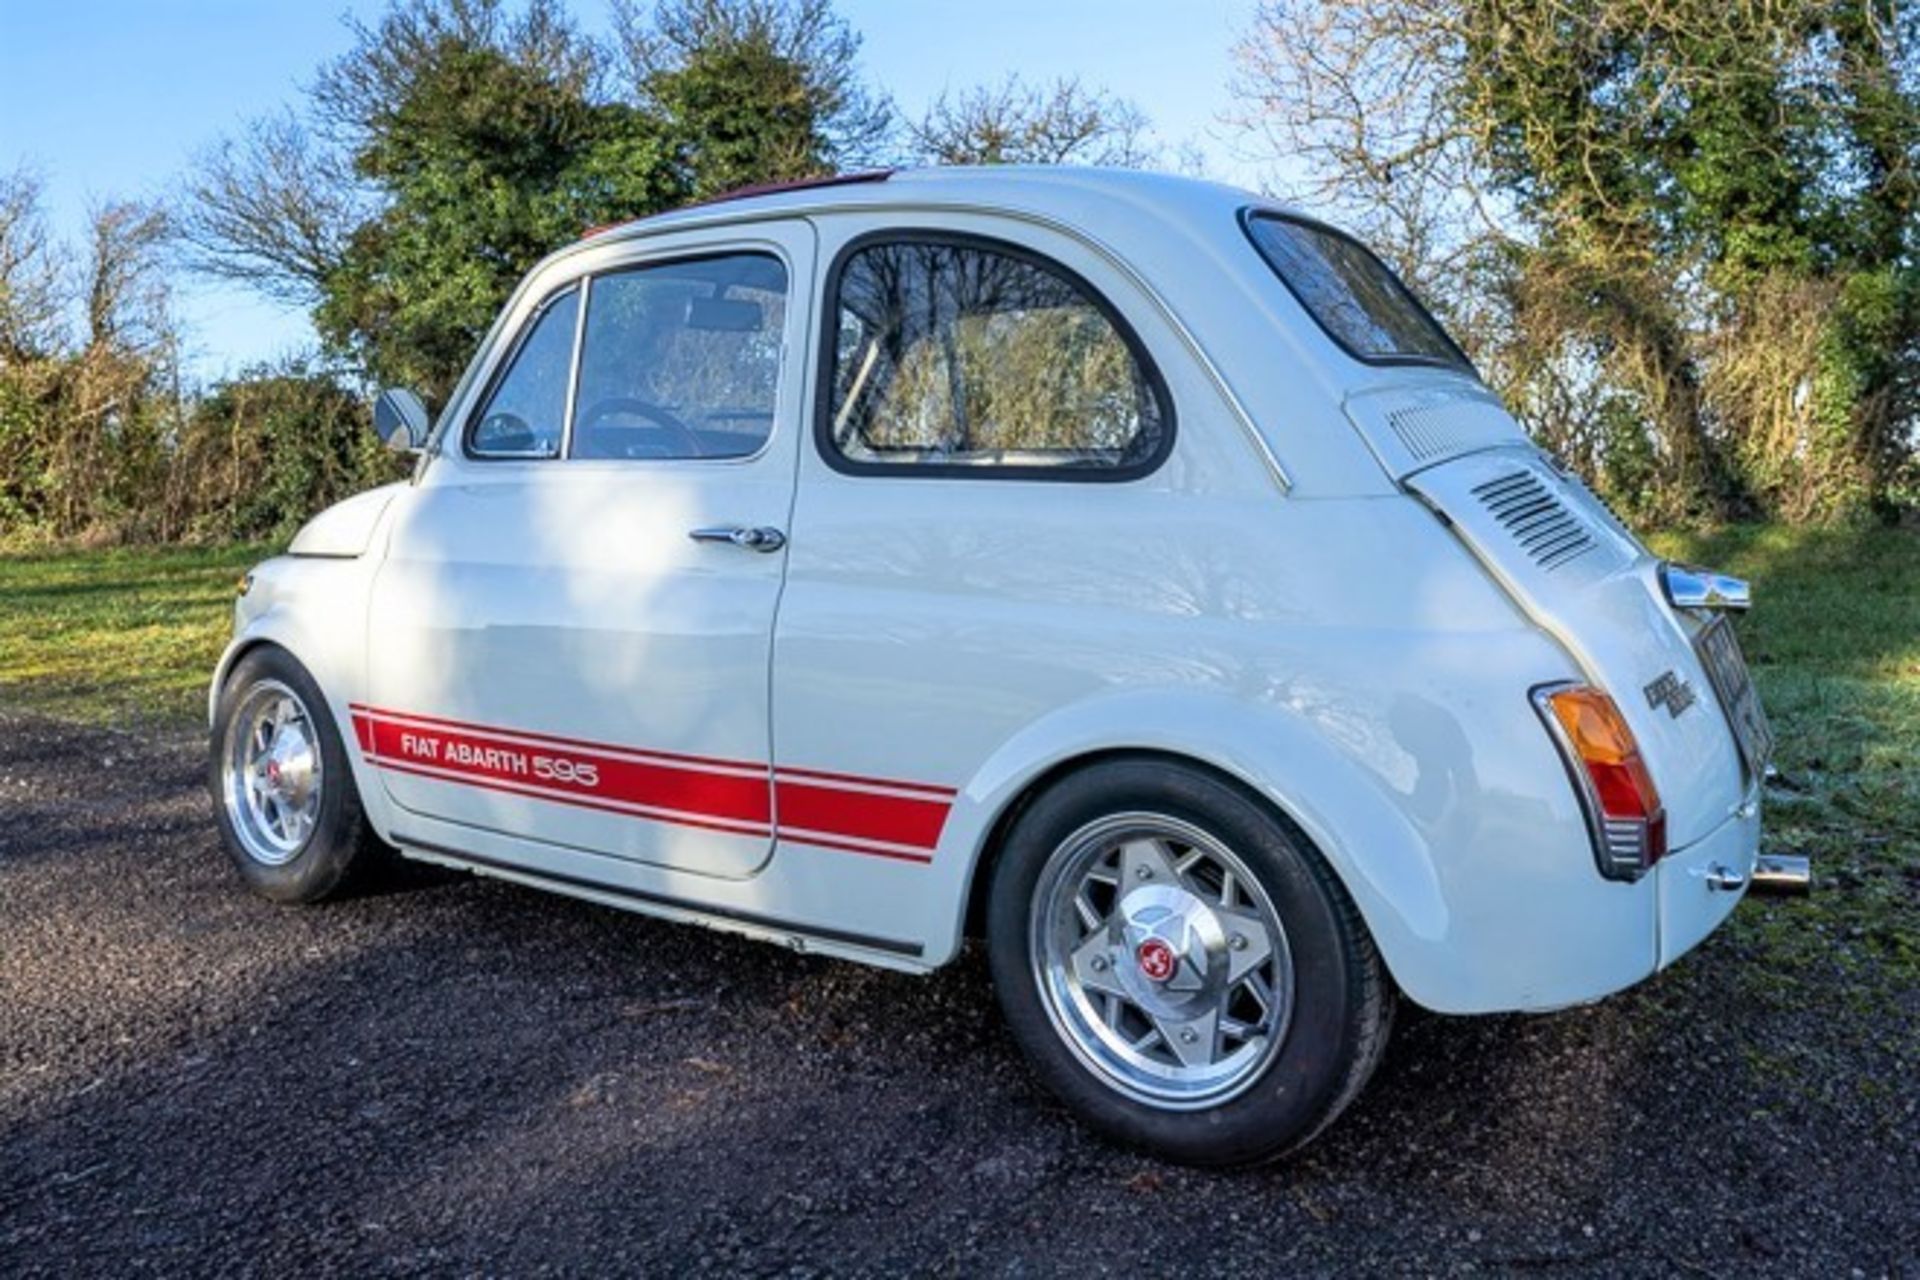 1972 FIAT 500 ABARTH TRIBUTE Registration Number: FHH 453K             Chassis Number: TBA - Image 3 of 16